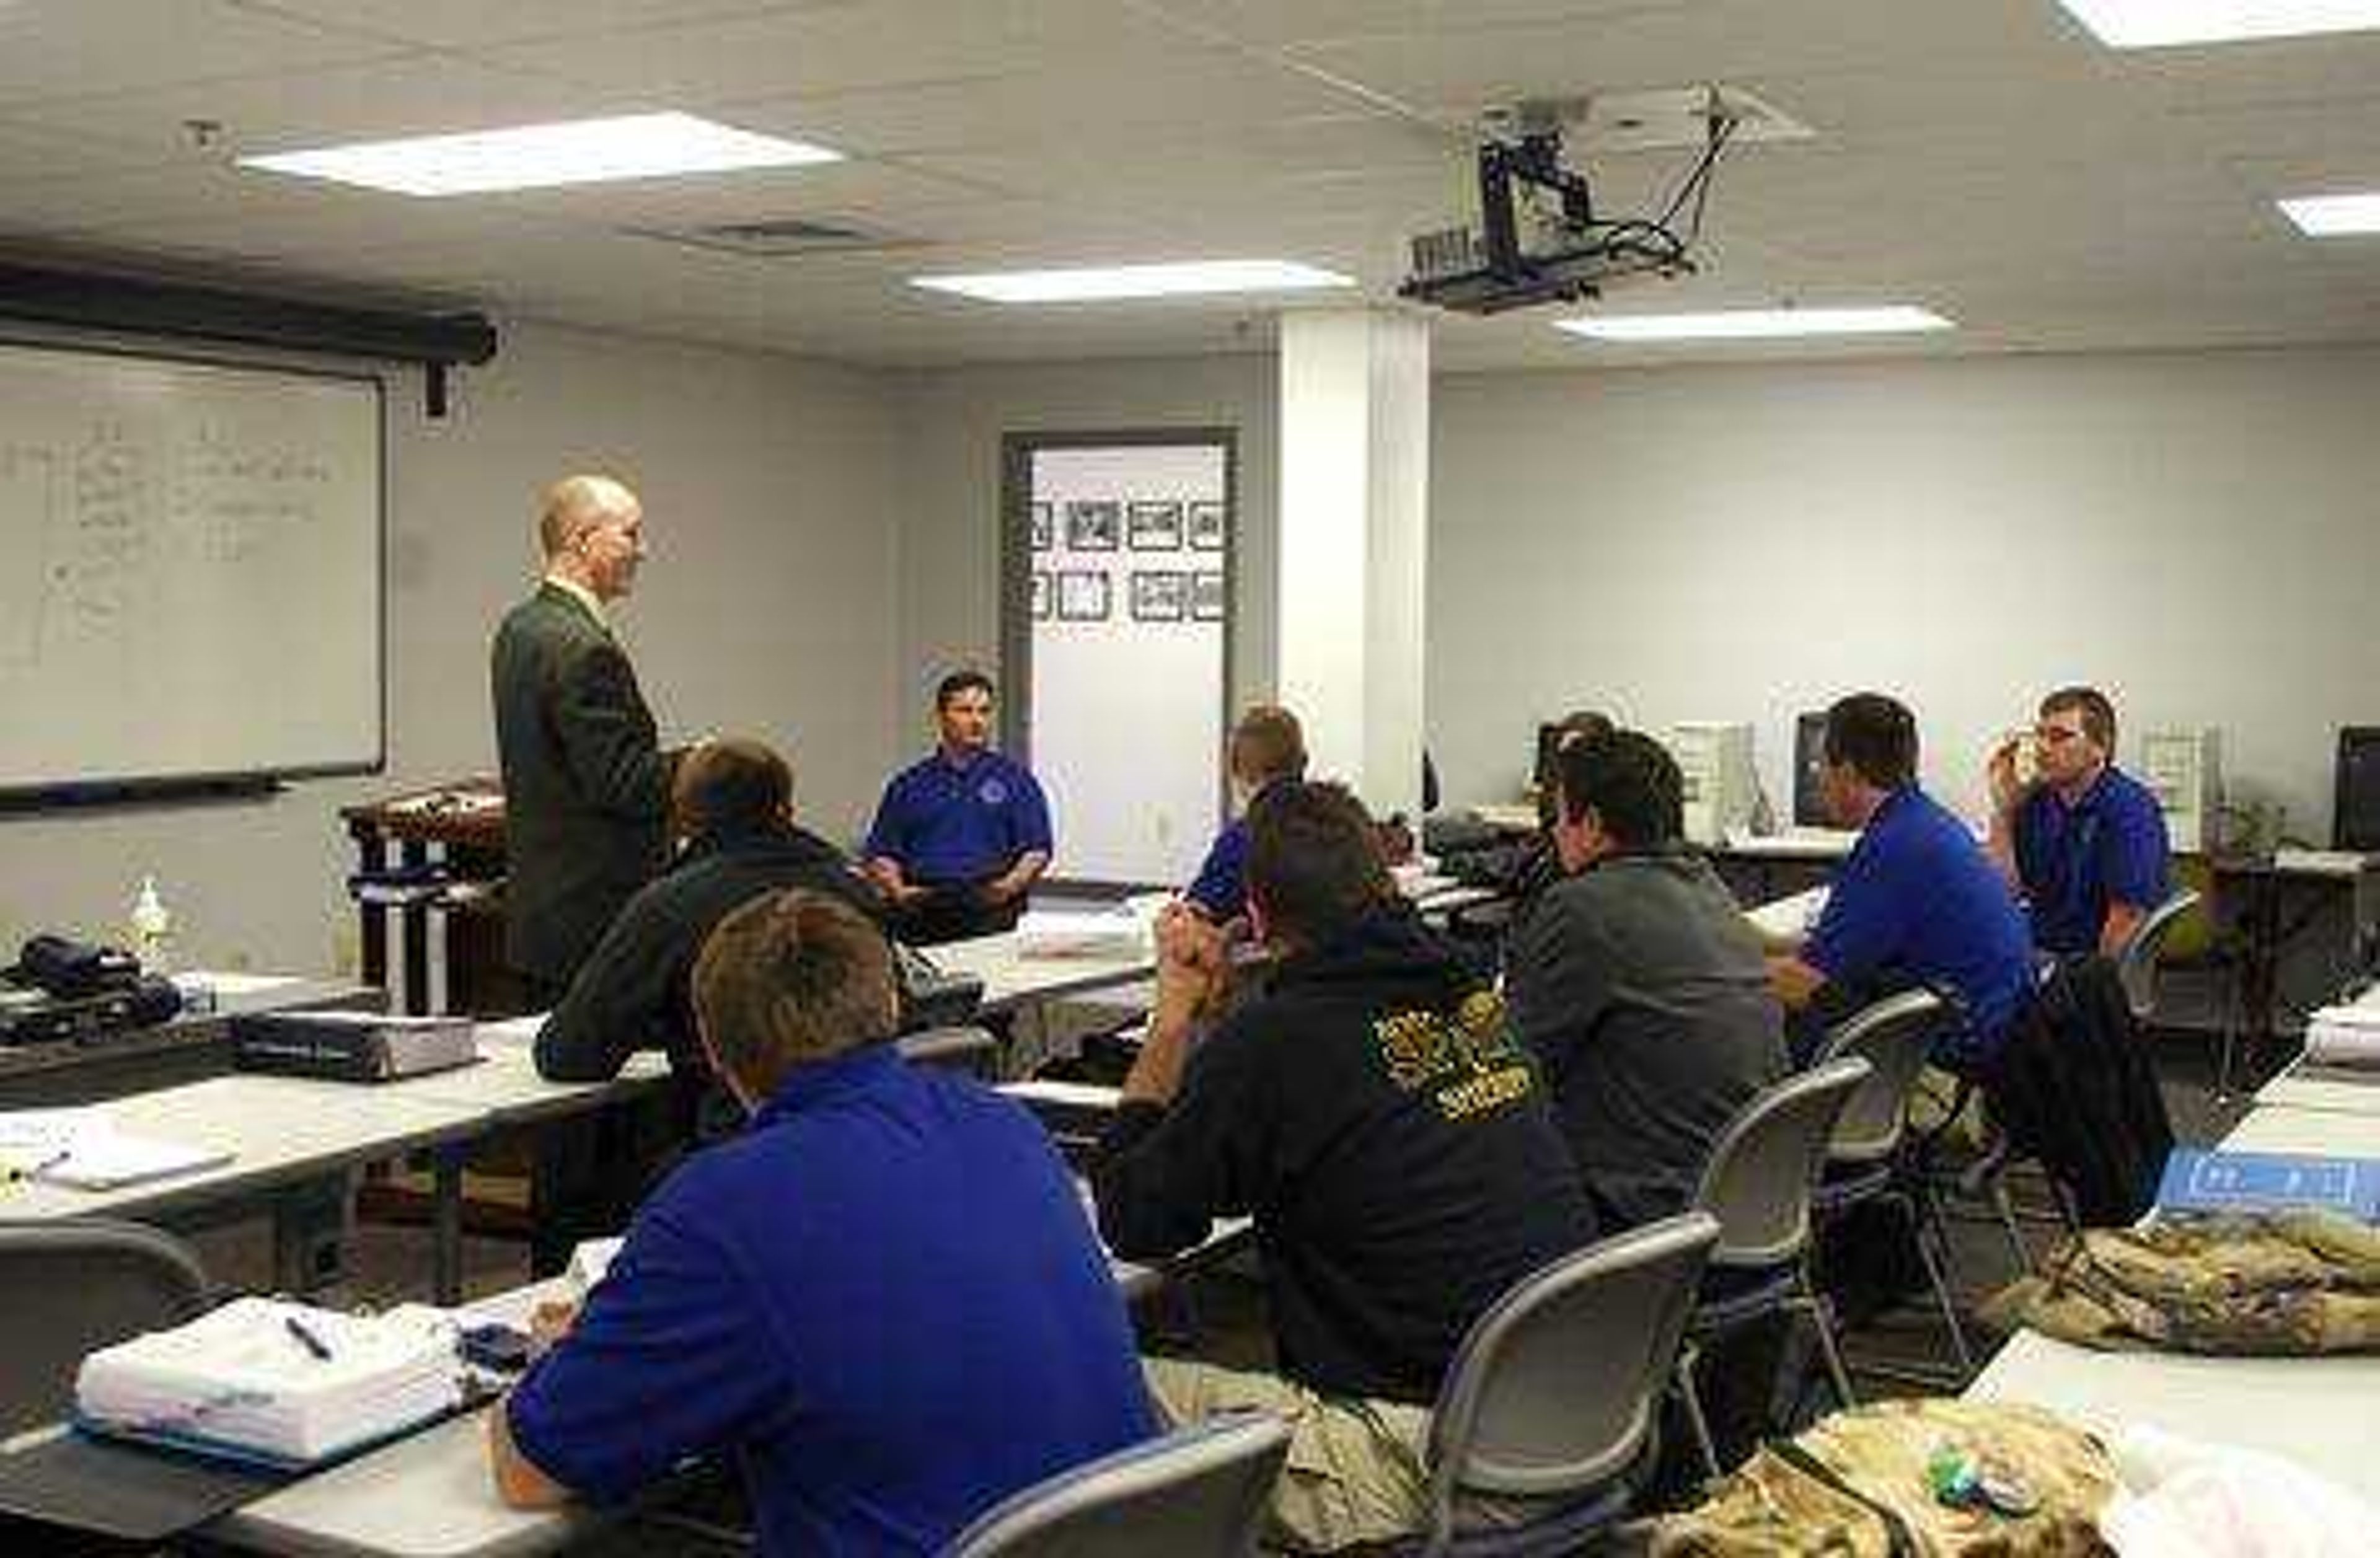 Southeast students in a law enforcement class take part in a mock trial on Monday. Photo by Nathan Hamilton